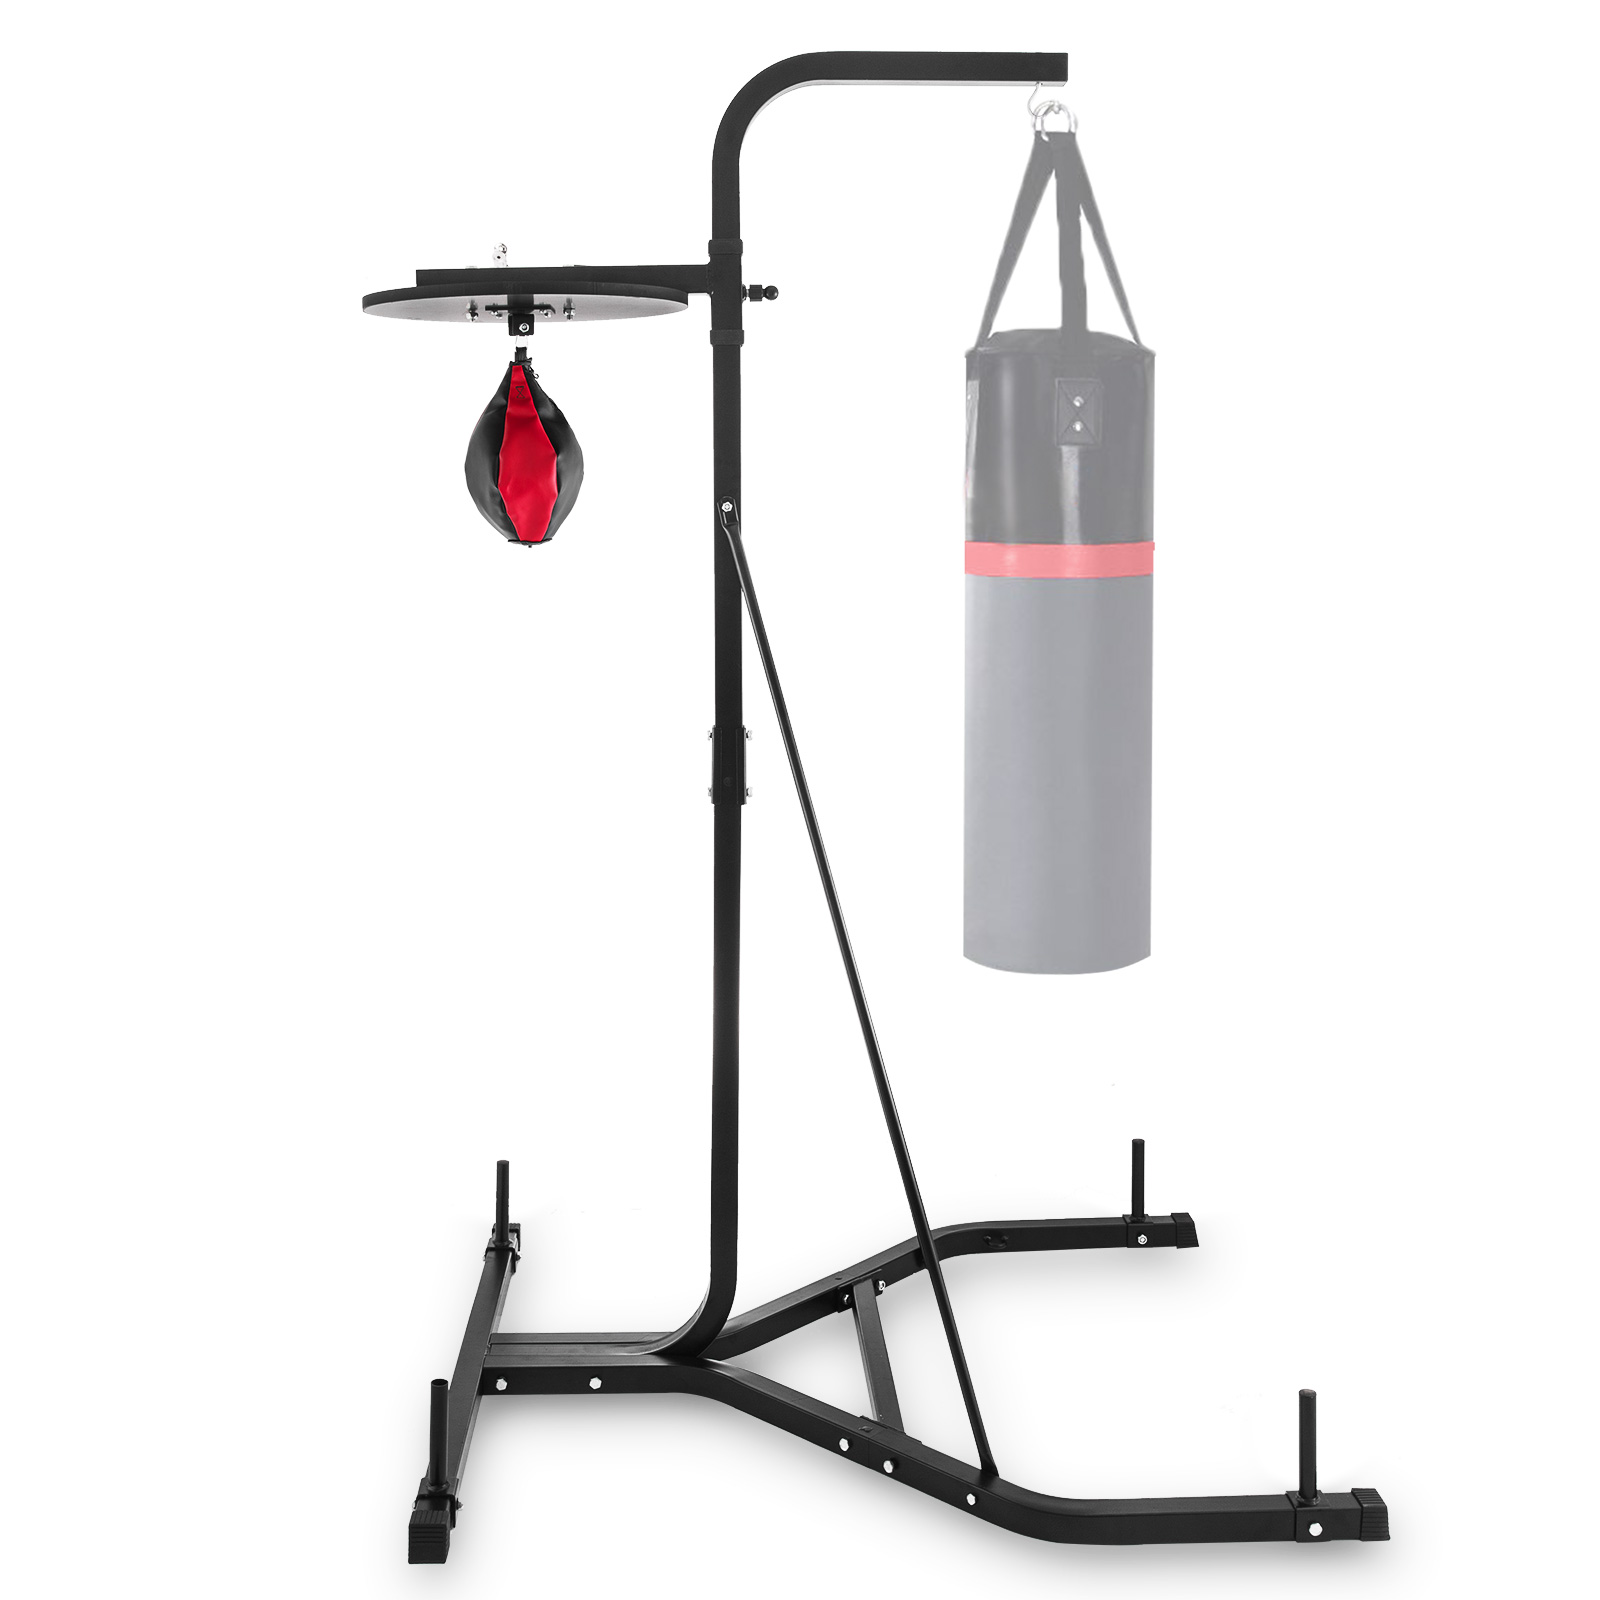 Adjustable Punch Bag Wall Bracket Stand Boxing Frame Equipment Fitness Exercise | eBay